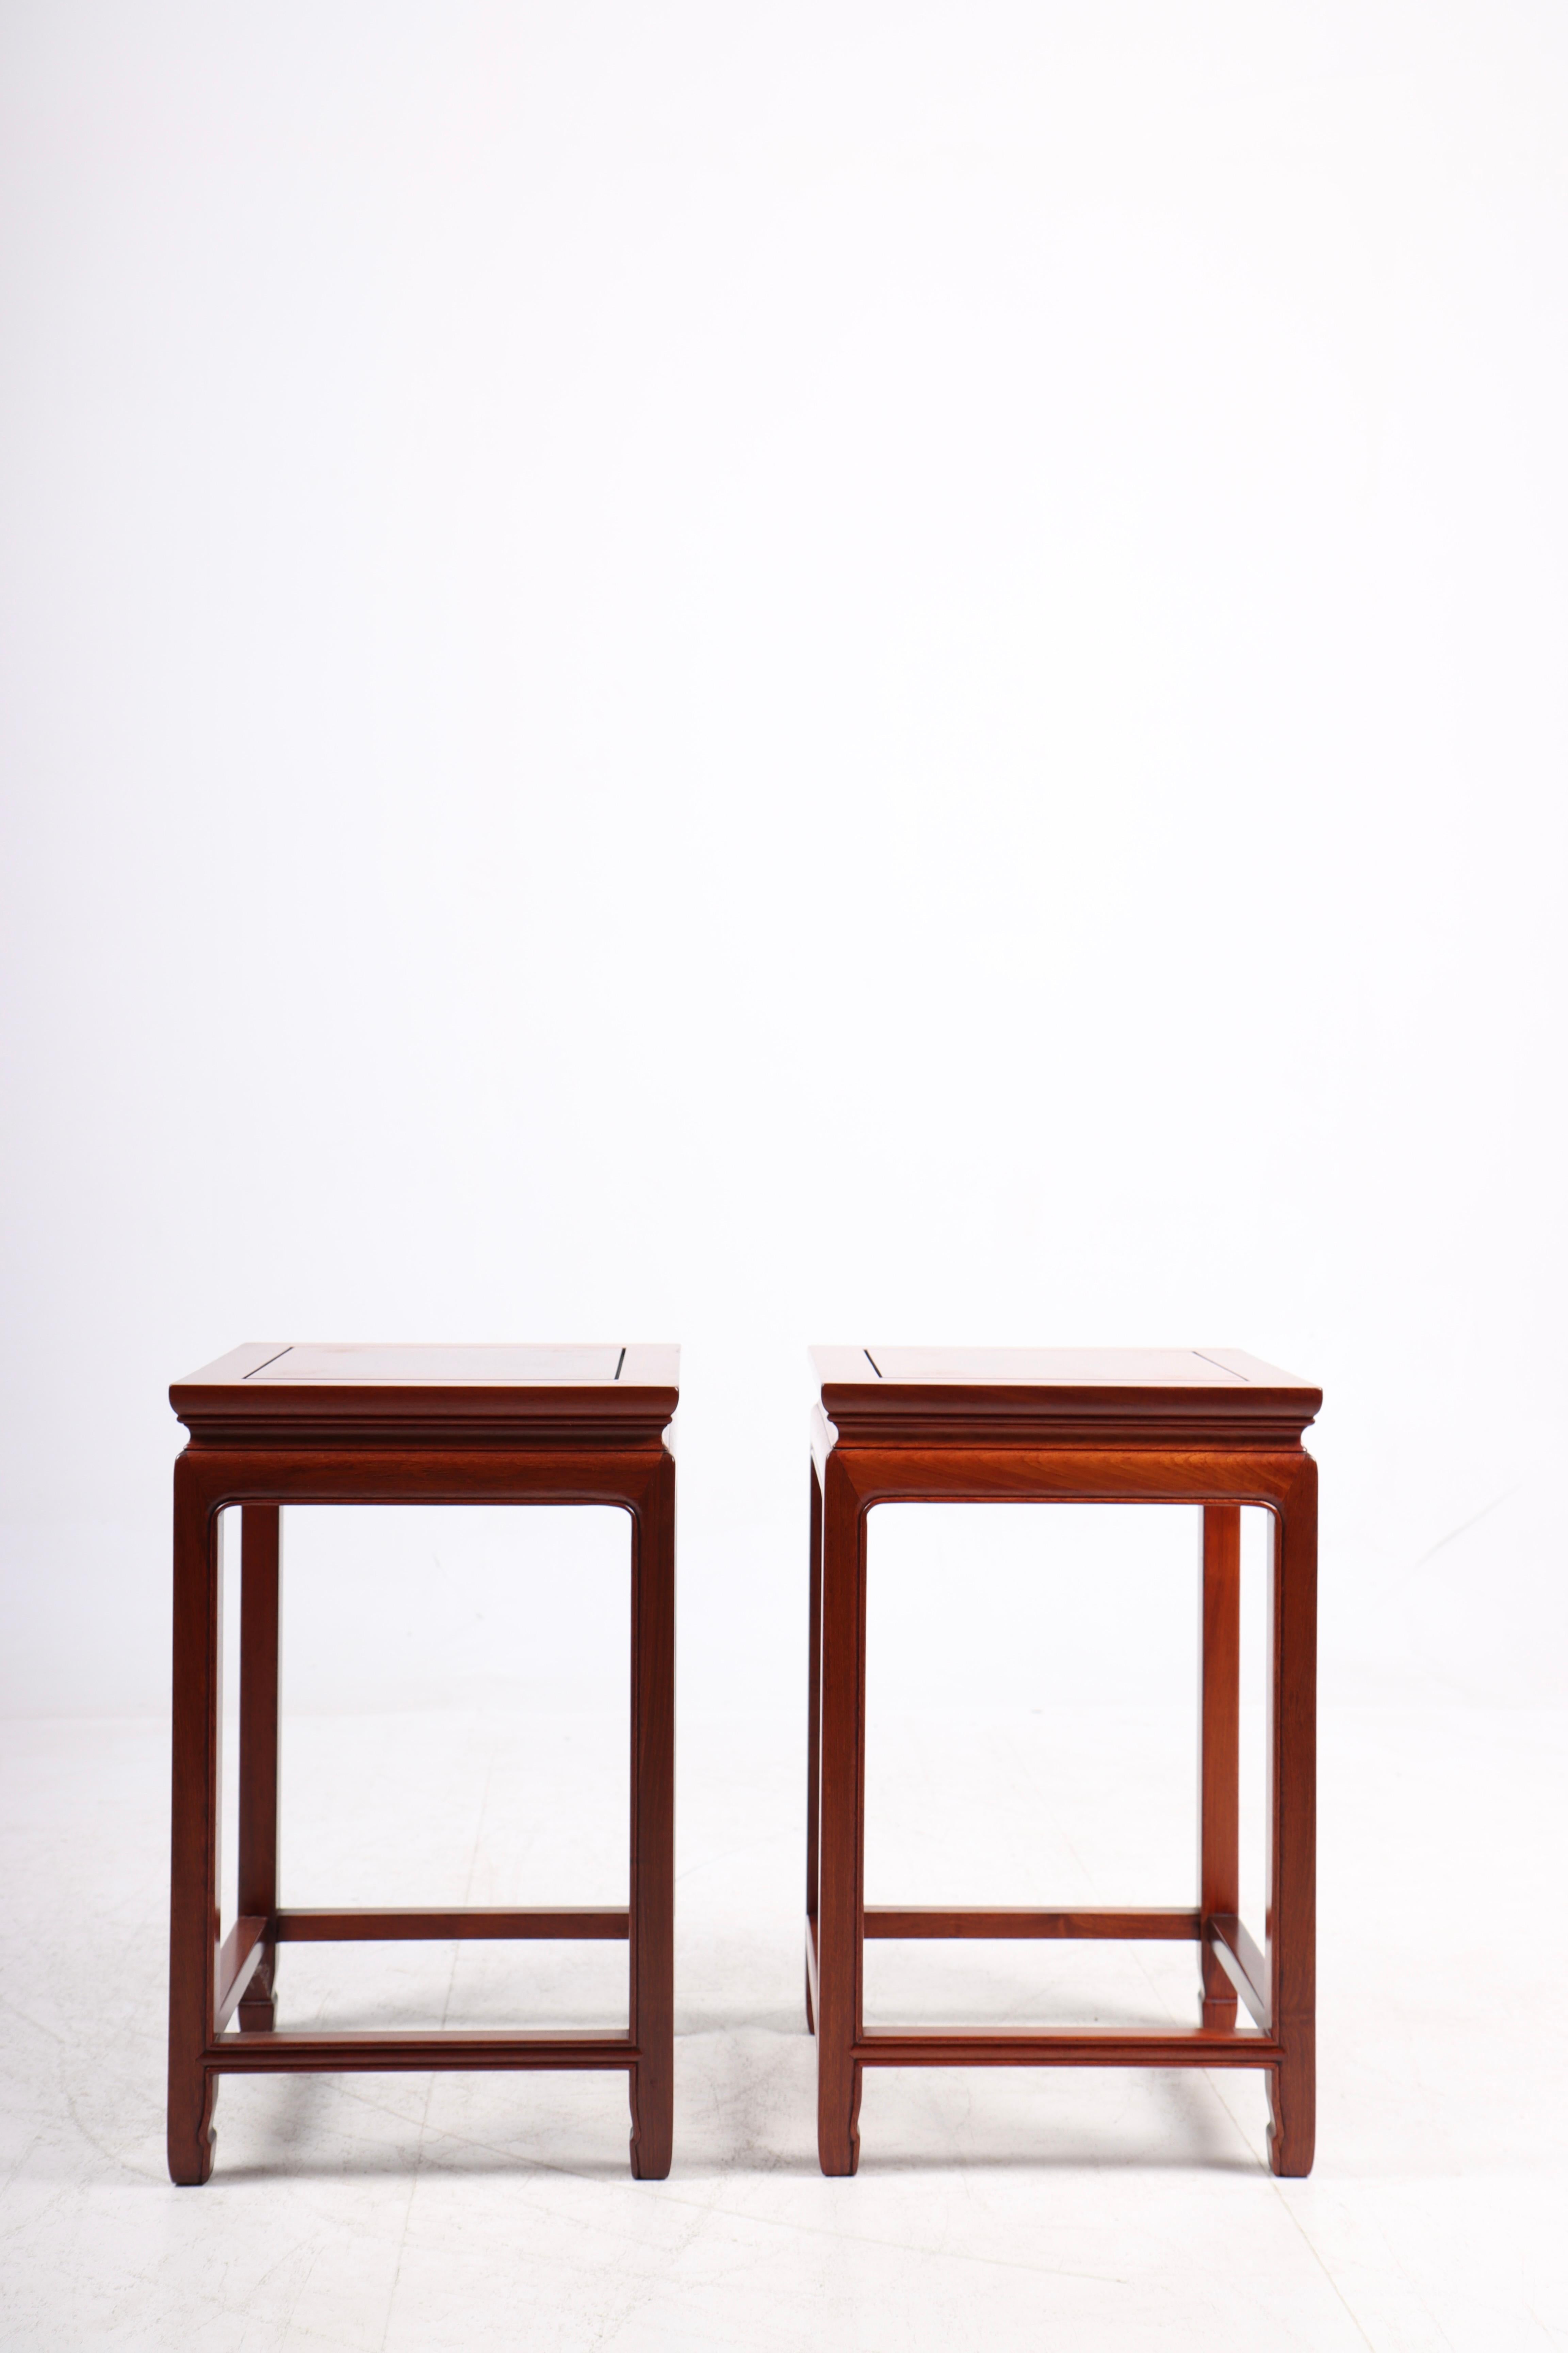 Pair of Chinese Side Tables in Mahogany, 1960s For Sale 1